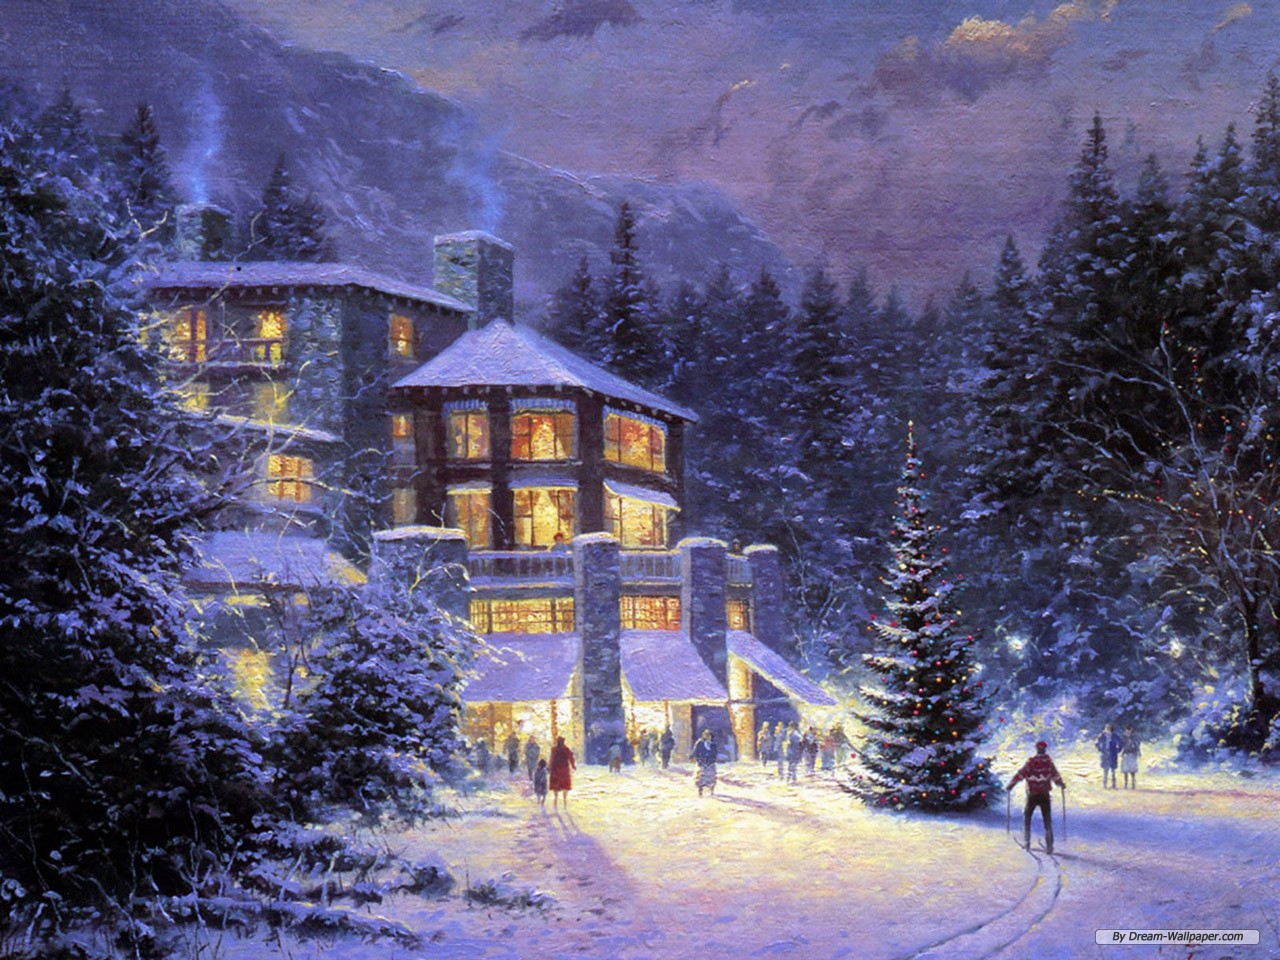  Holiday wallpaper Christmas Eve Painting wallpaper 1280960 1280x960